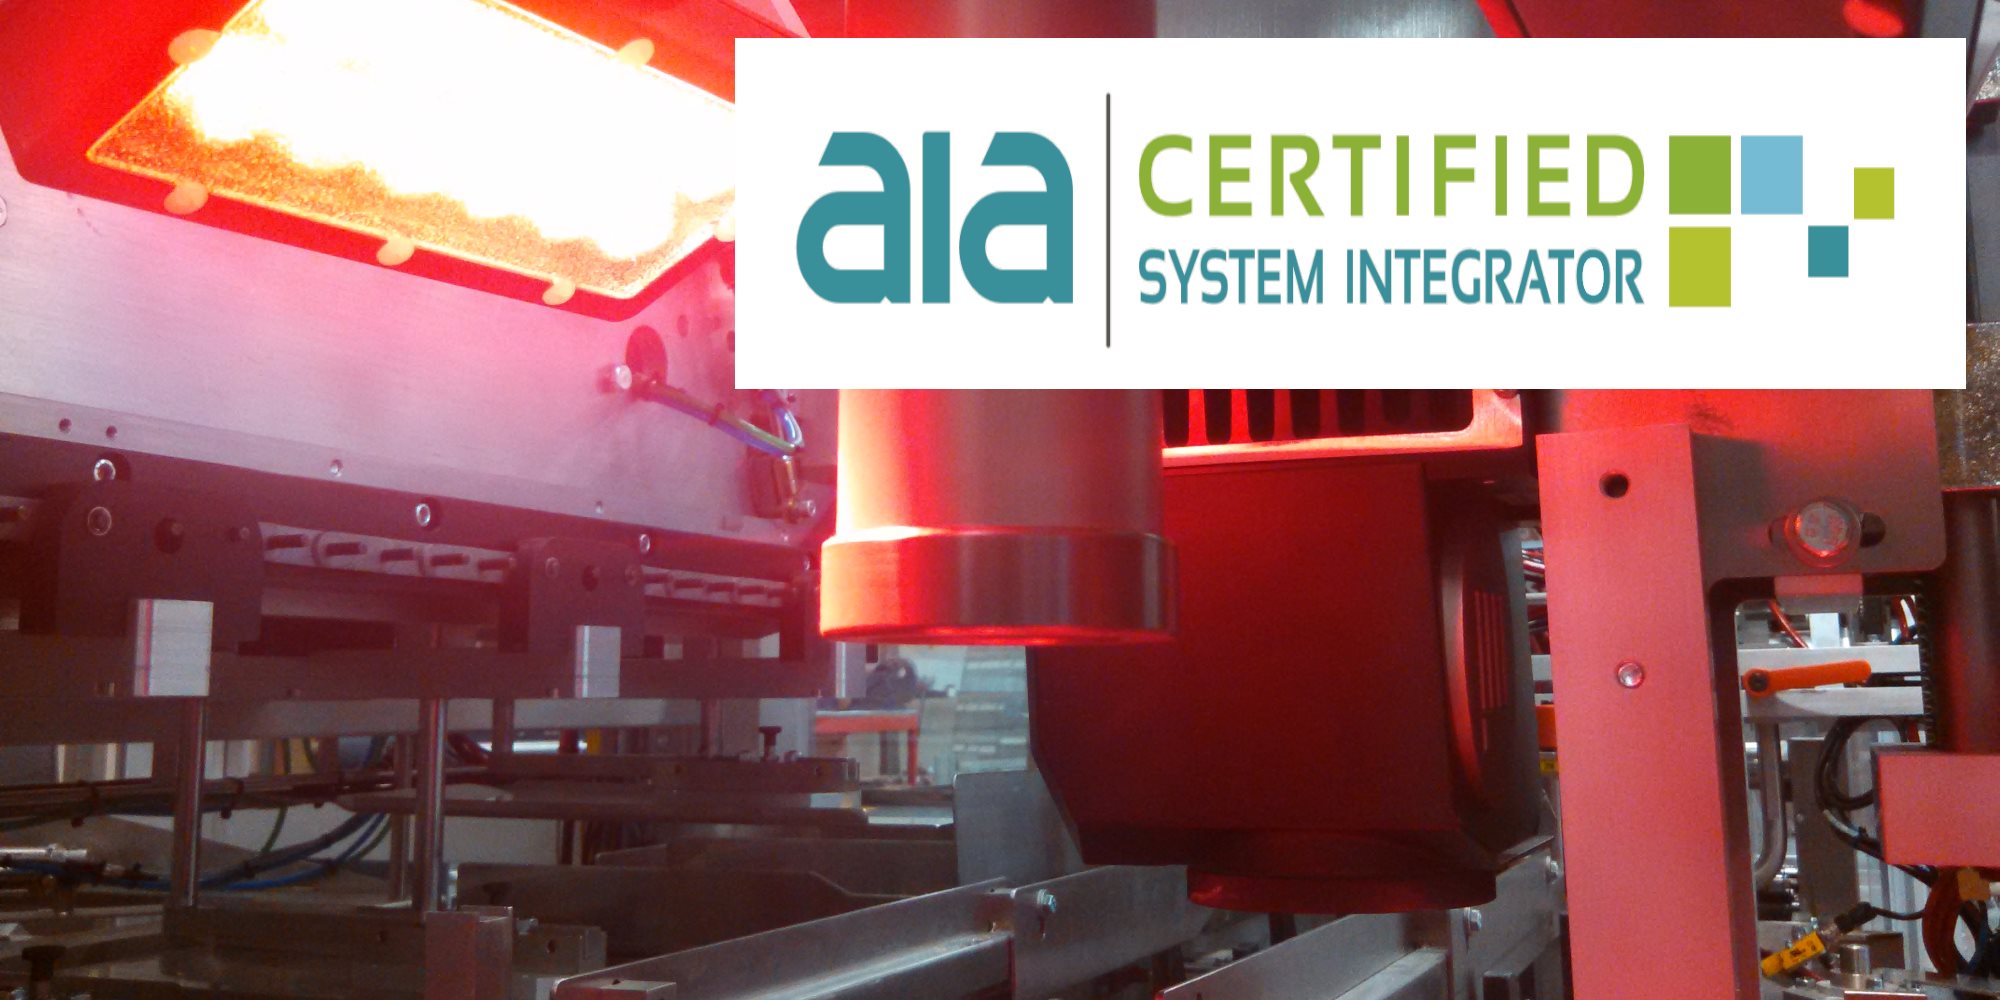 AIA Certified System Integrator